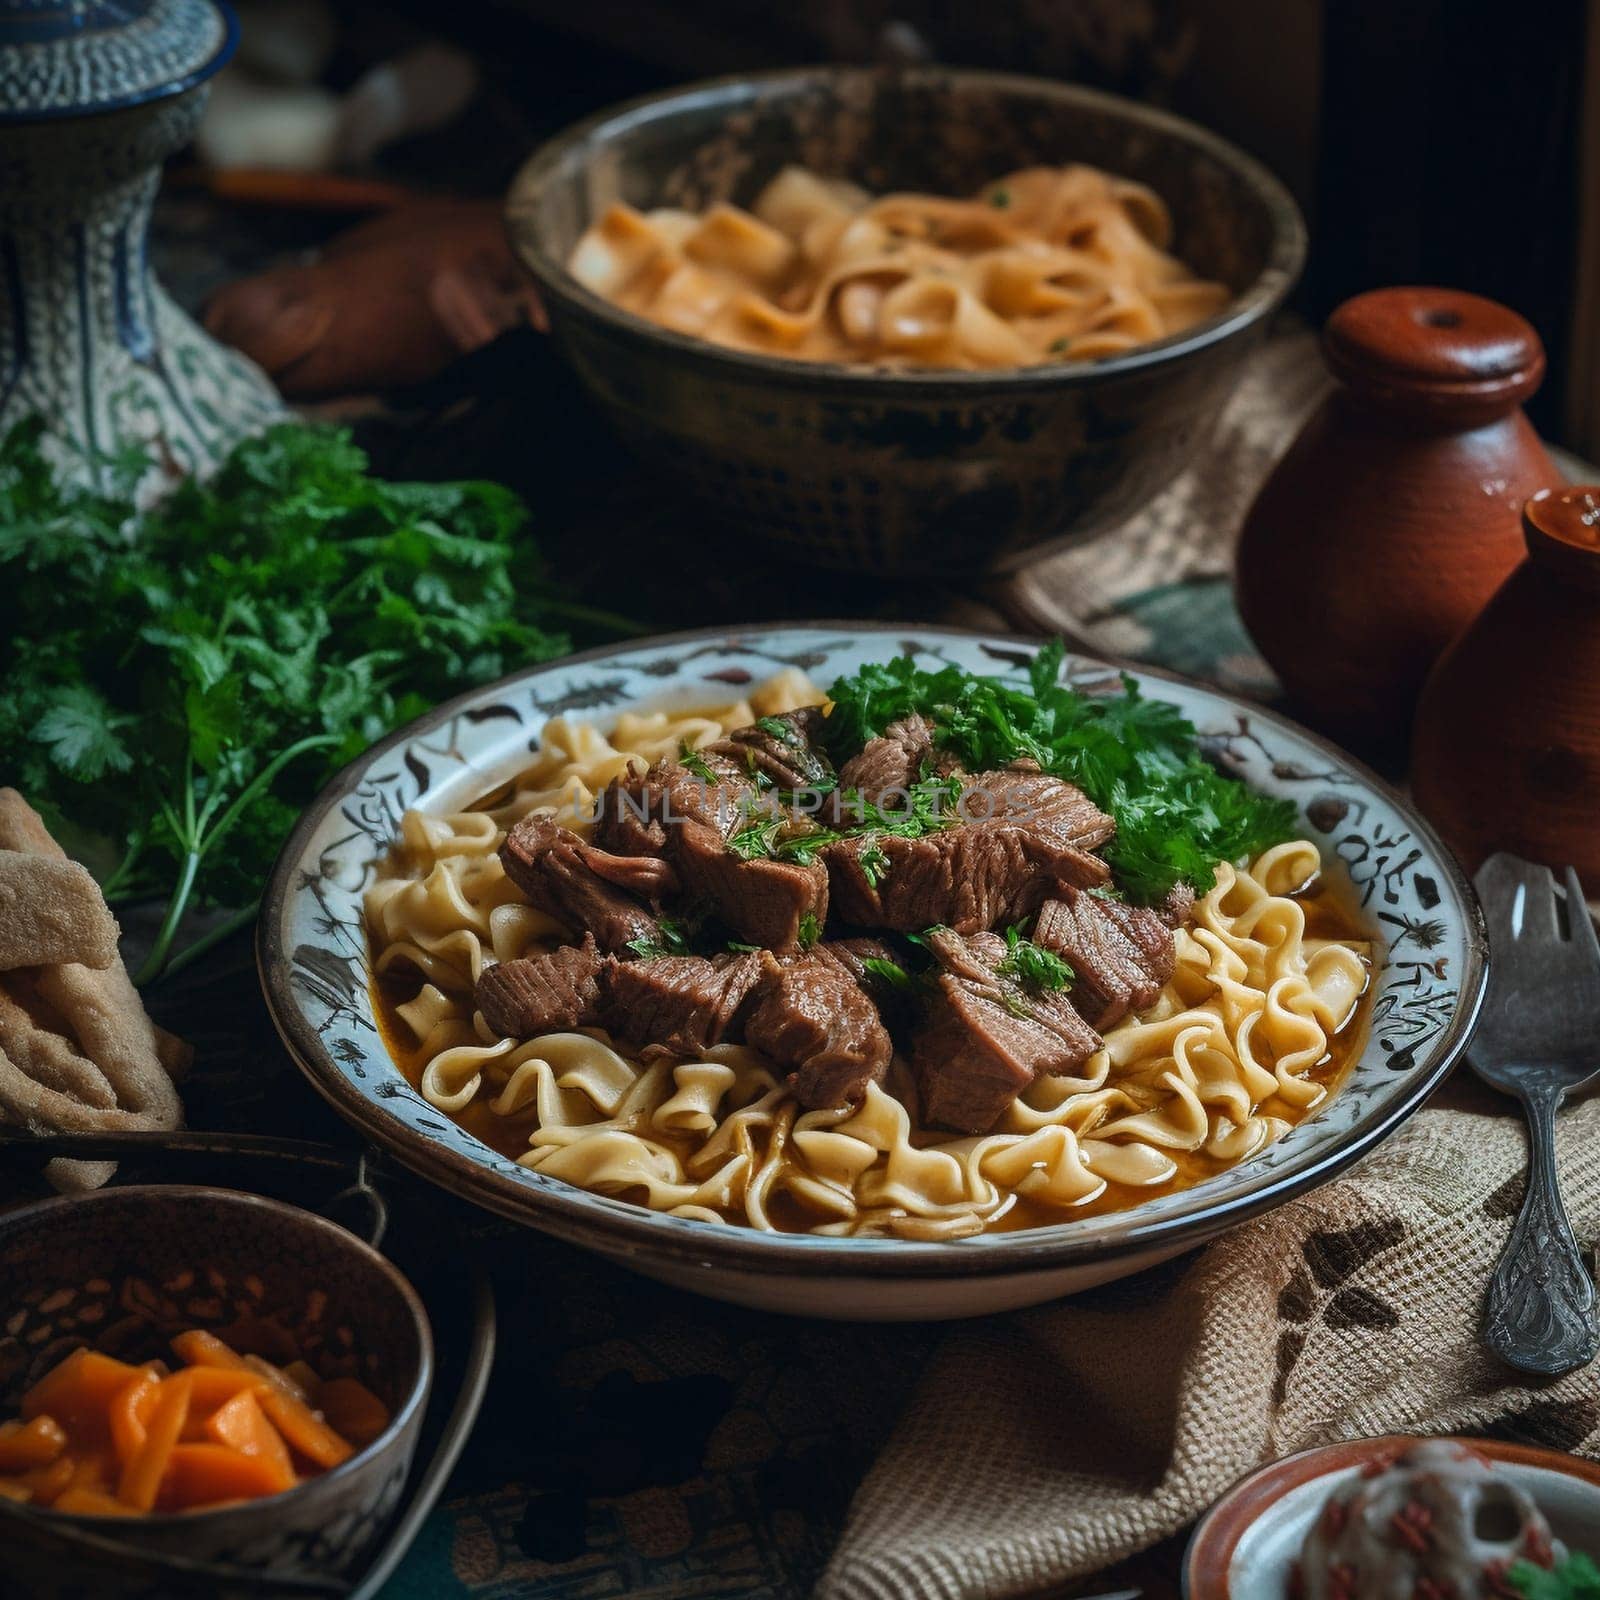 This close-up shot captures the hearty and comforting flavors of Kazakhstani Beshbarmak, a dish made with tender pieces of boiled lamb or beef served over boiled pasta and garnished with fresh herbs and onions. In this image, the Beshbarmak is served with a side of broth or tea and sometimes a salad of fresh vegetables. The cozy and inviting indoor scene in the background adds to the comforting atmosphere, with warm colors and soft lighting enhancing the mood. The warm, diffused lighting and use of a reflector highlight the texture and colors of the food, creating a cozy and comforting mood.